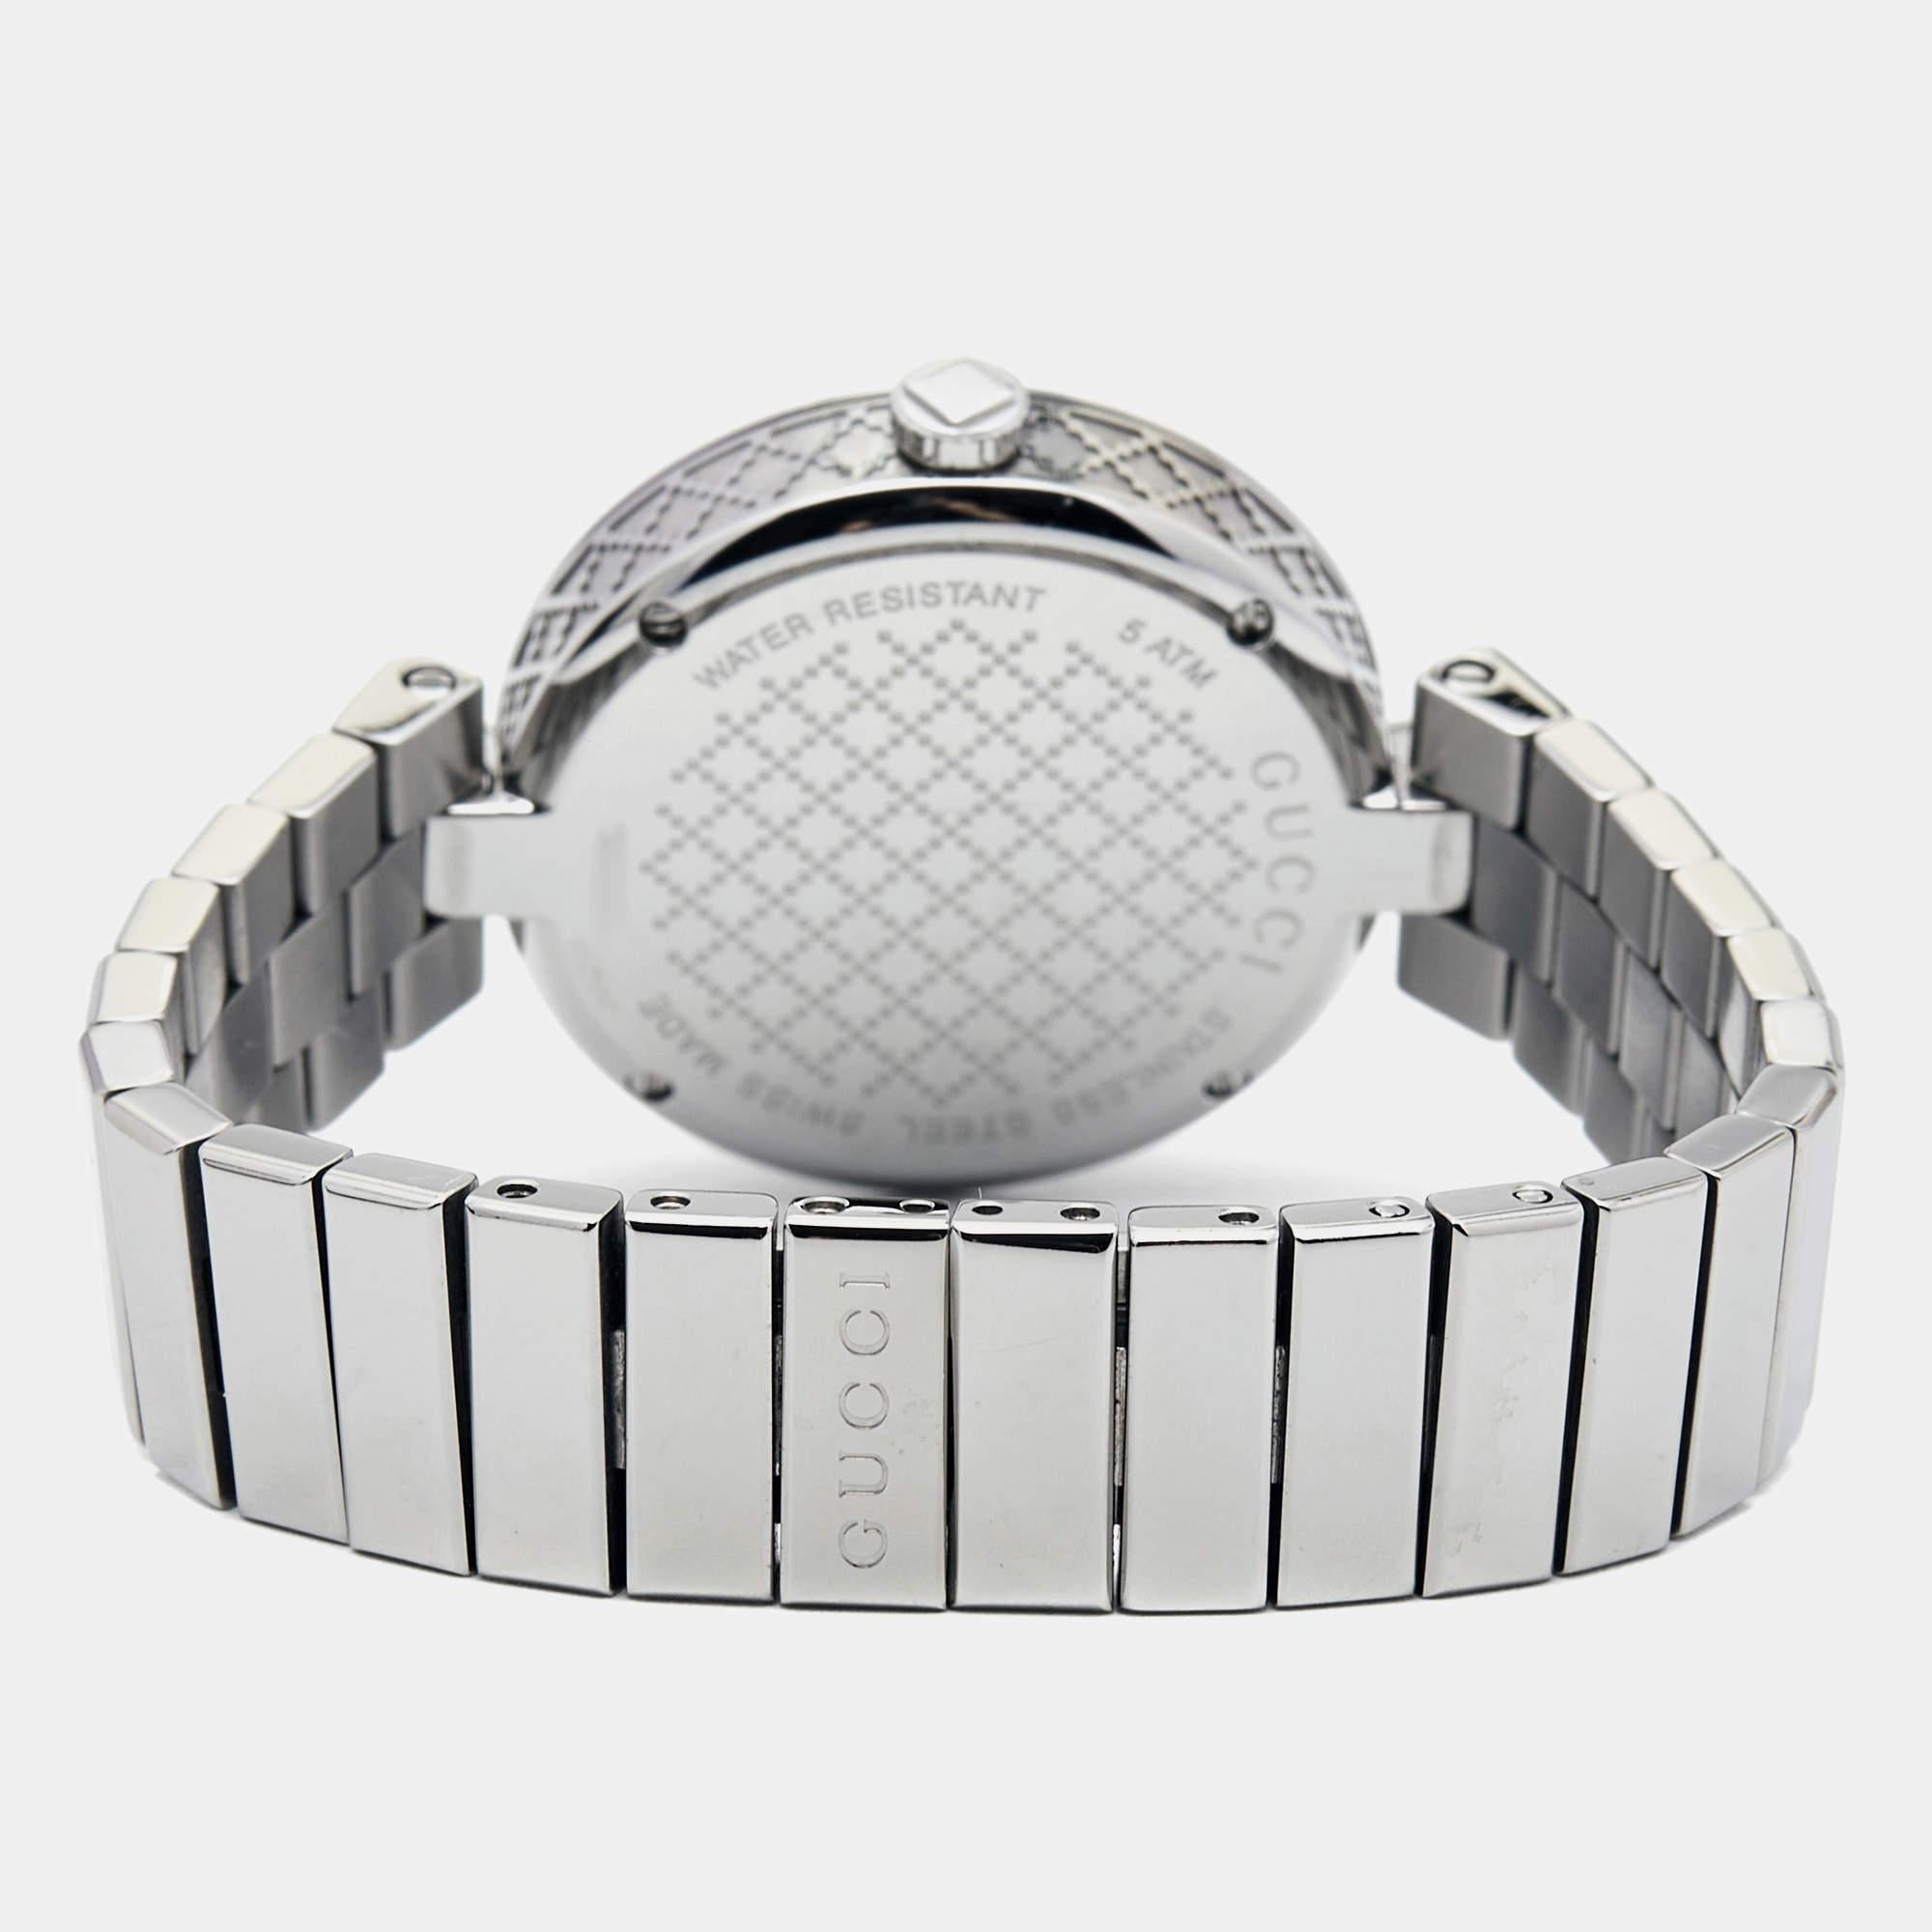 Gucci's Diamantissima watch is a fine option for everyday use. Constructed using stainless steel, it has a luxurious look and a durable quality. The round case has a smooth bezel and a white dial.

